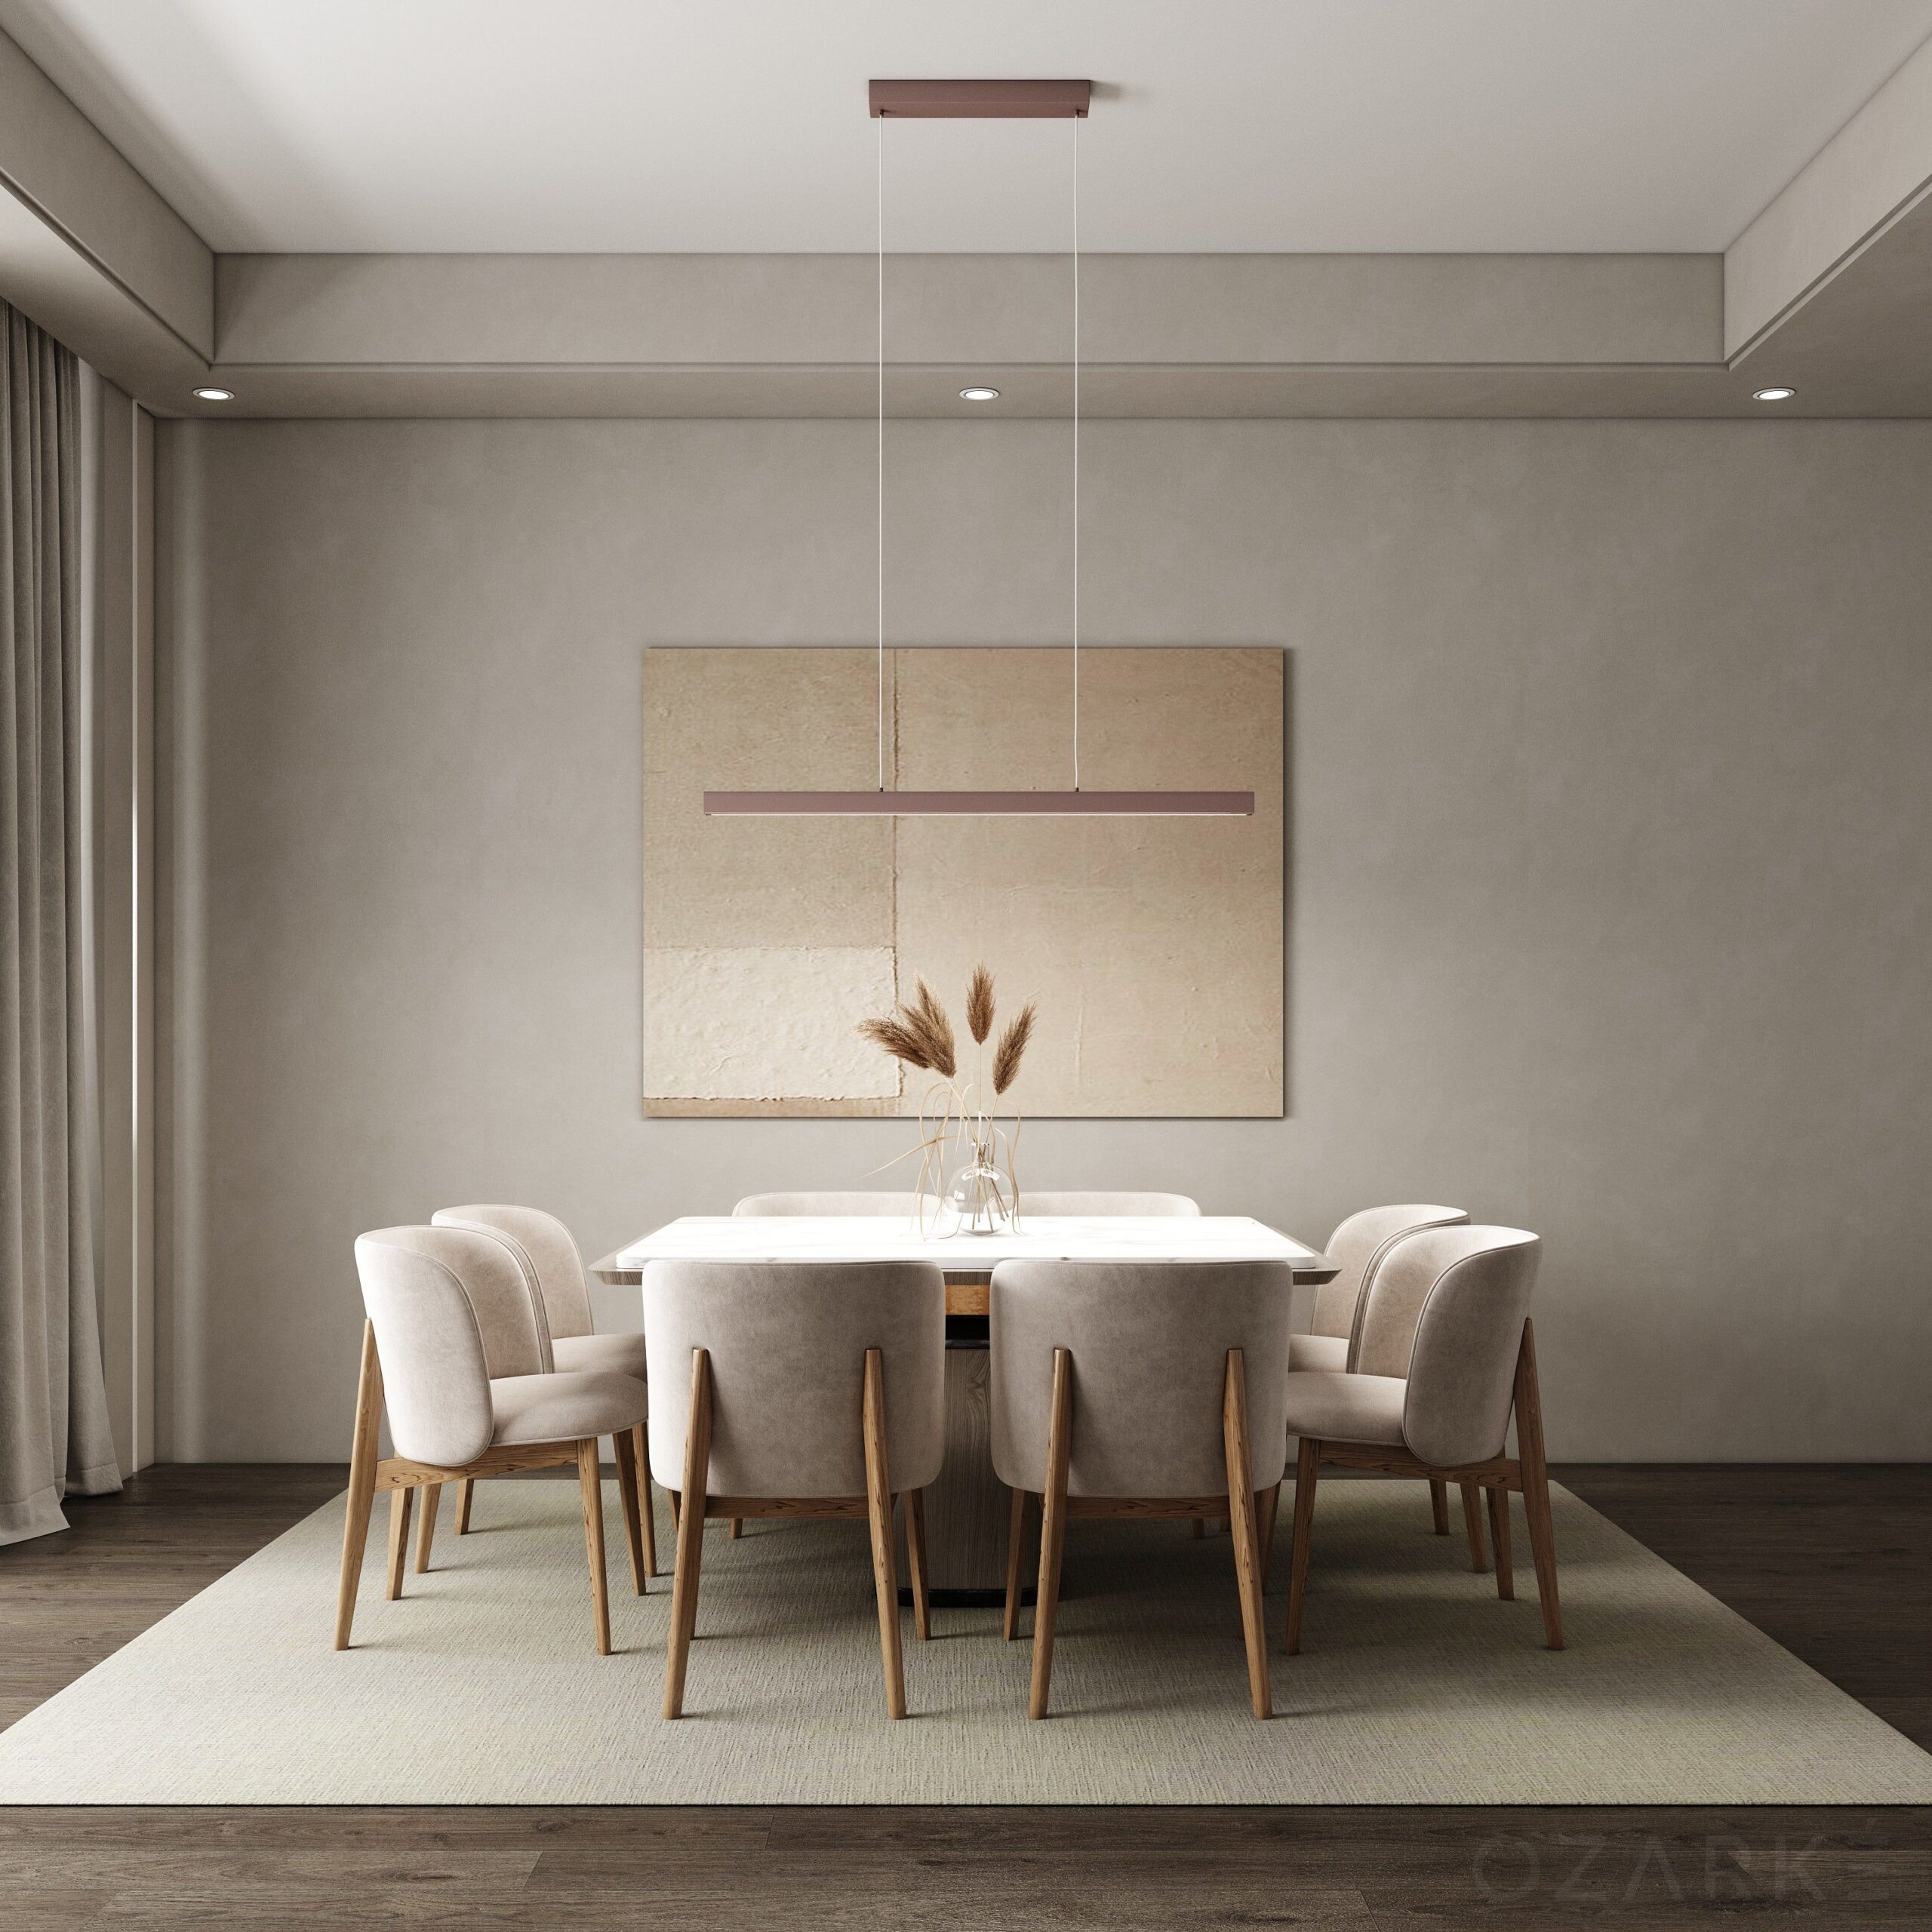 Minimalist Lighting Create a Modern and Simplistic Look with Simple Lighting Solutions